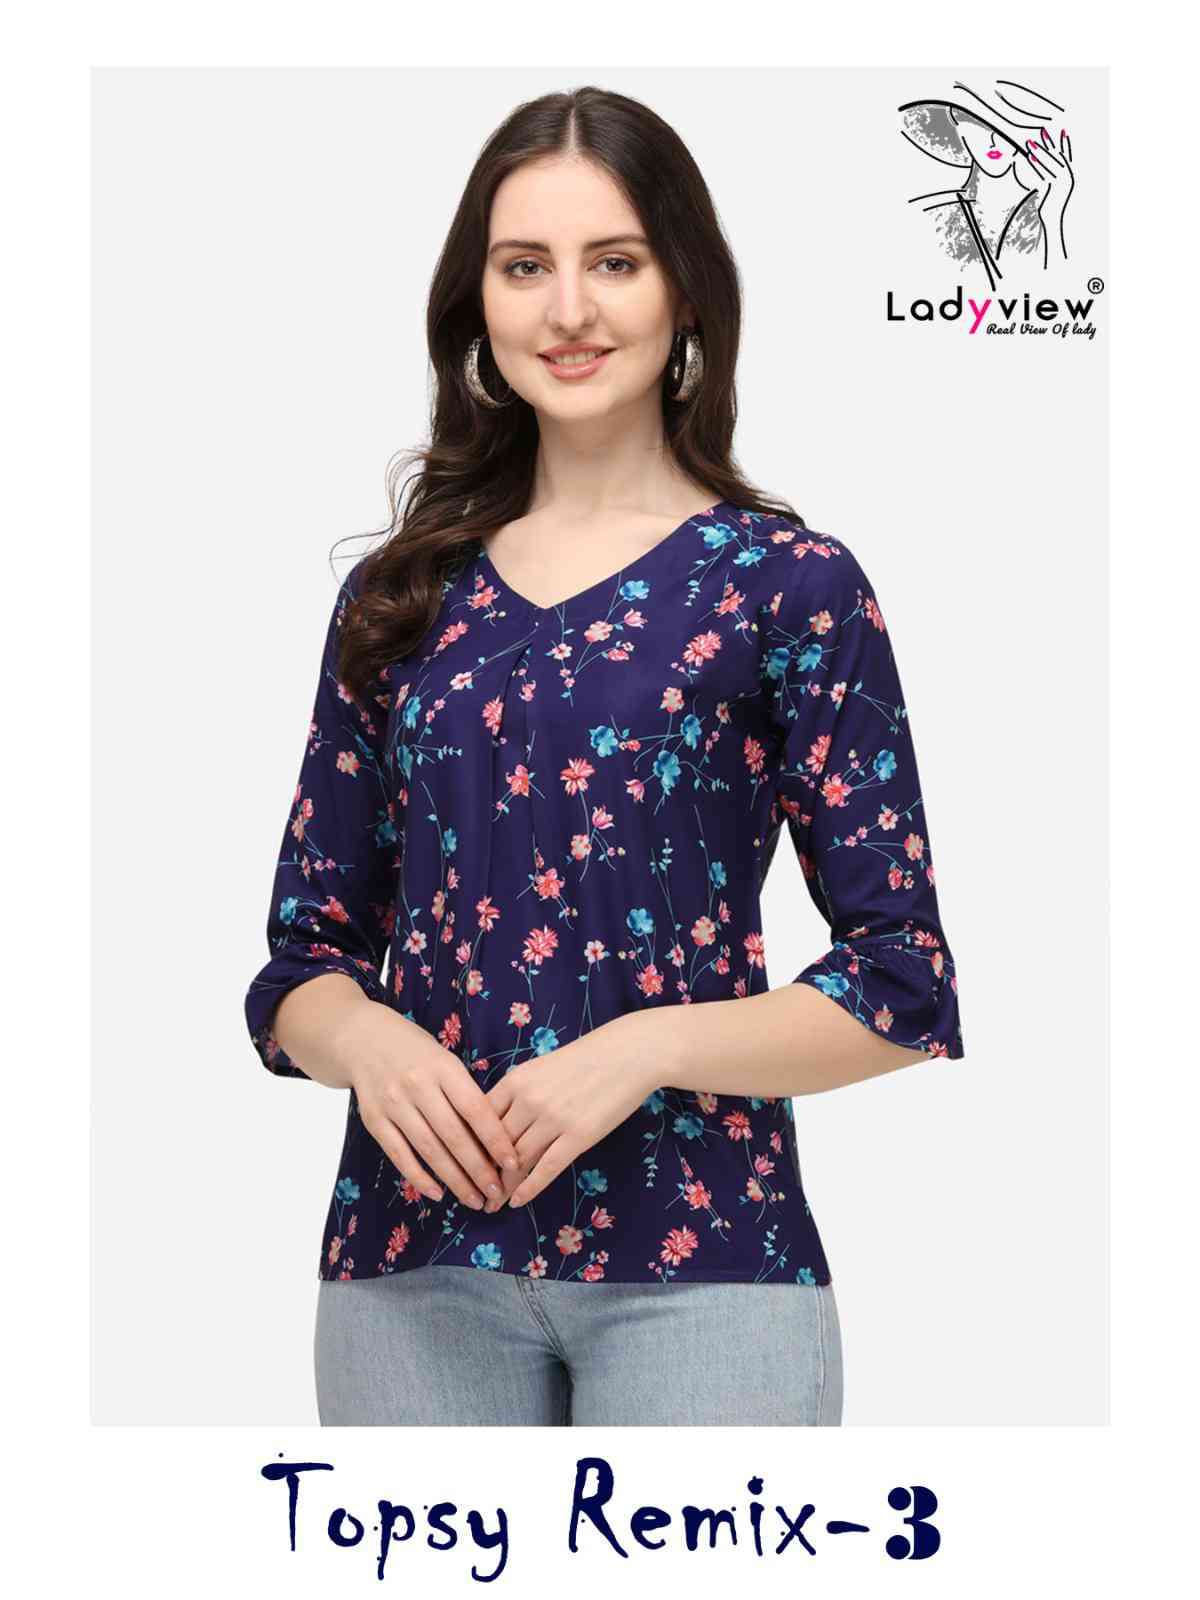 Ladyview Topsy Remix Vol 3 Fancy Printed Exclusive Short Tops Collection Dealer